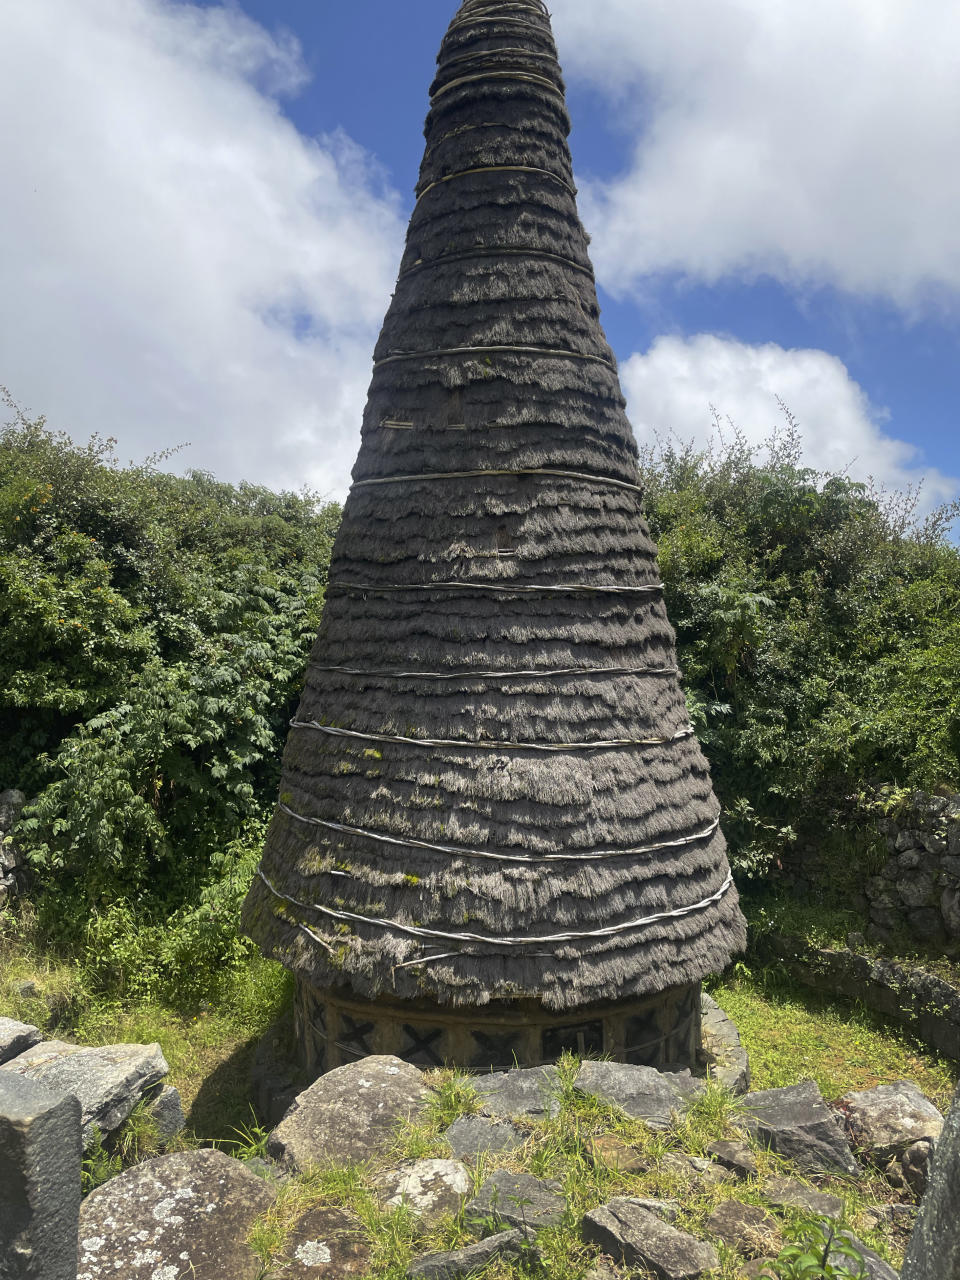 A conical temple dedicated to the deity Moonbu, constructed by members of the Toda tribe in the Nilgiris Hills of southern India with stone, cane and a special type of grass from the sacred grasslands, on Aug. 31, 2023. This temple is located in the heart of a sacred grassland and Toda settlement known as Muttunad Mund. (AP Photo/Deepa Bharath)